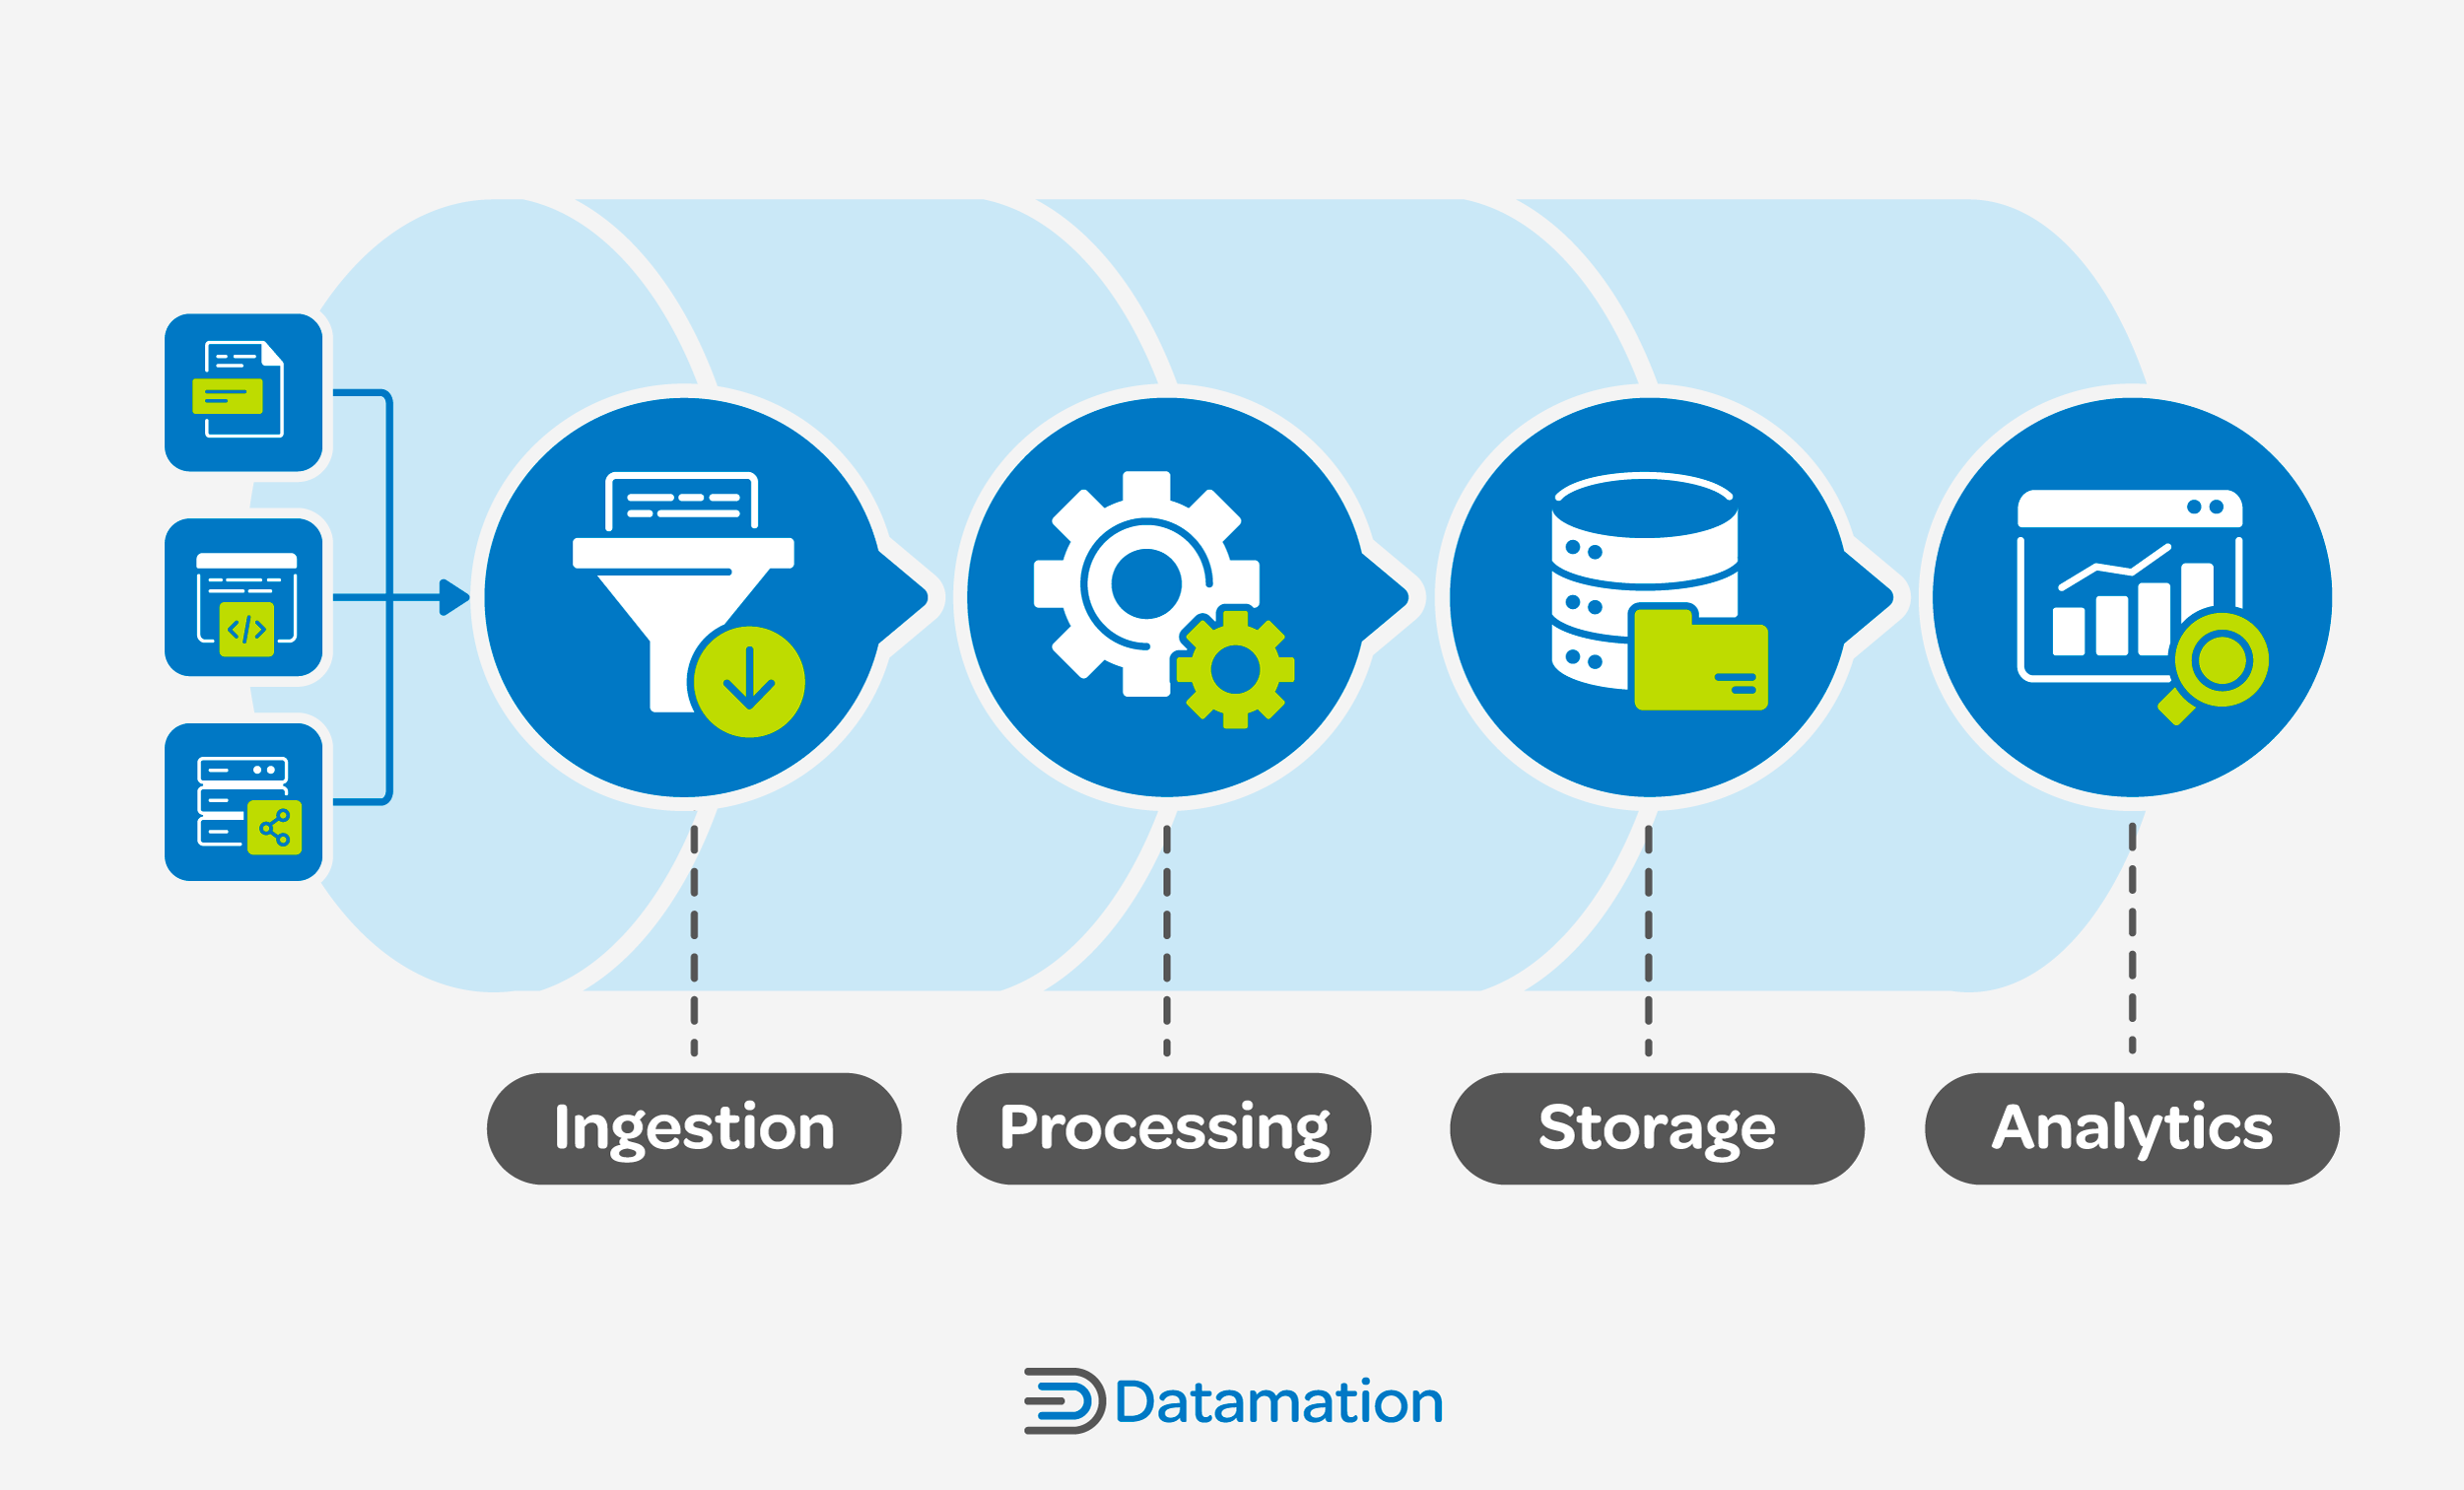 Graphic showing the stages of data pipeline architecture: ingestion, processing, storage, analytics